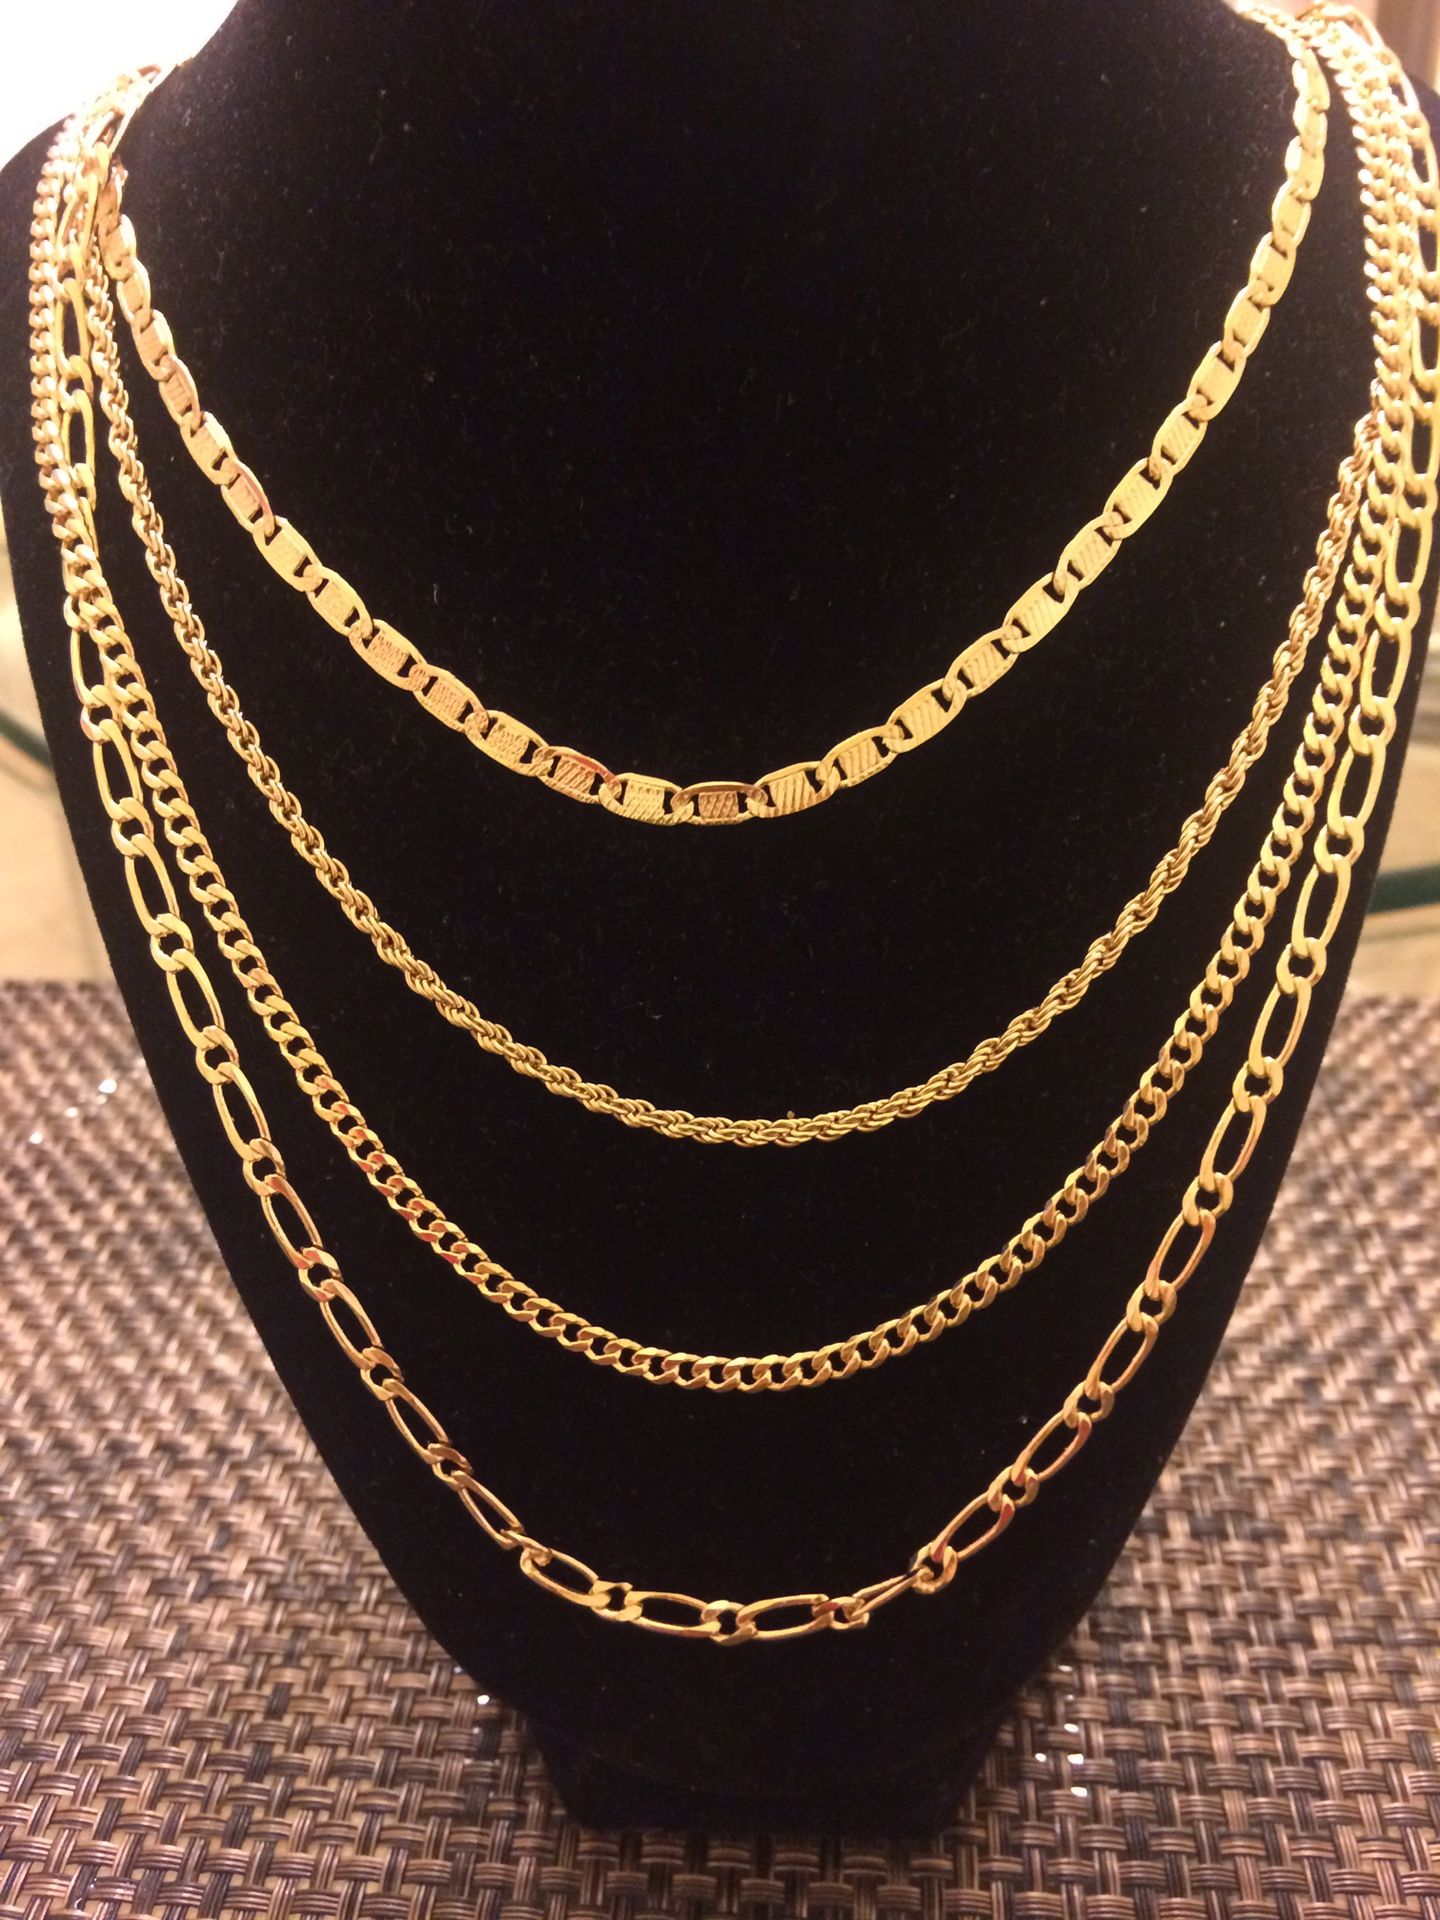 Gold plated14K chains. No gold.